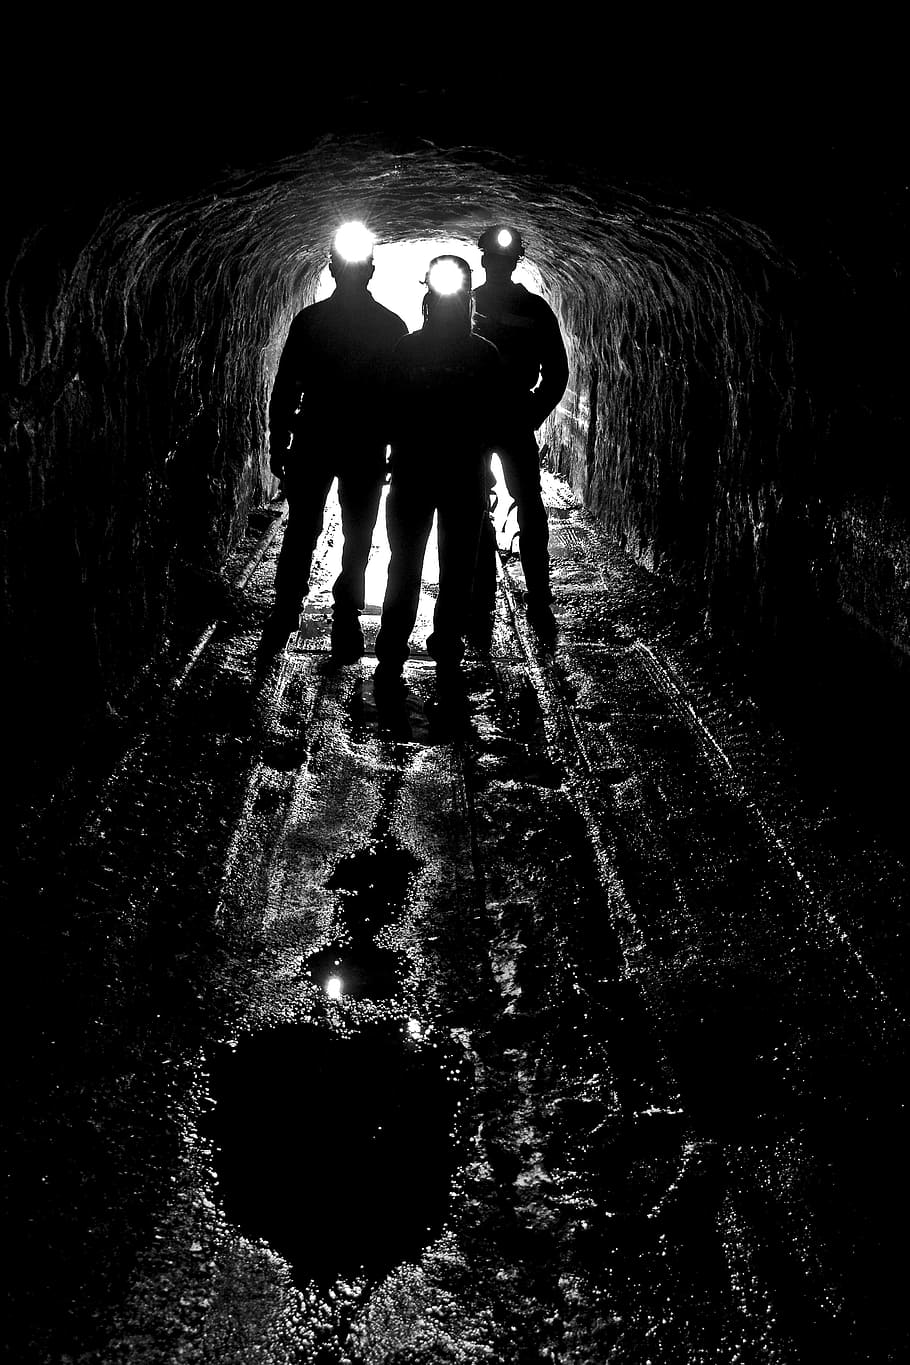 silhouette of three person on cave with headlamp, silhouettes